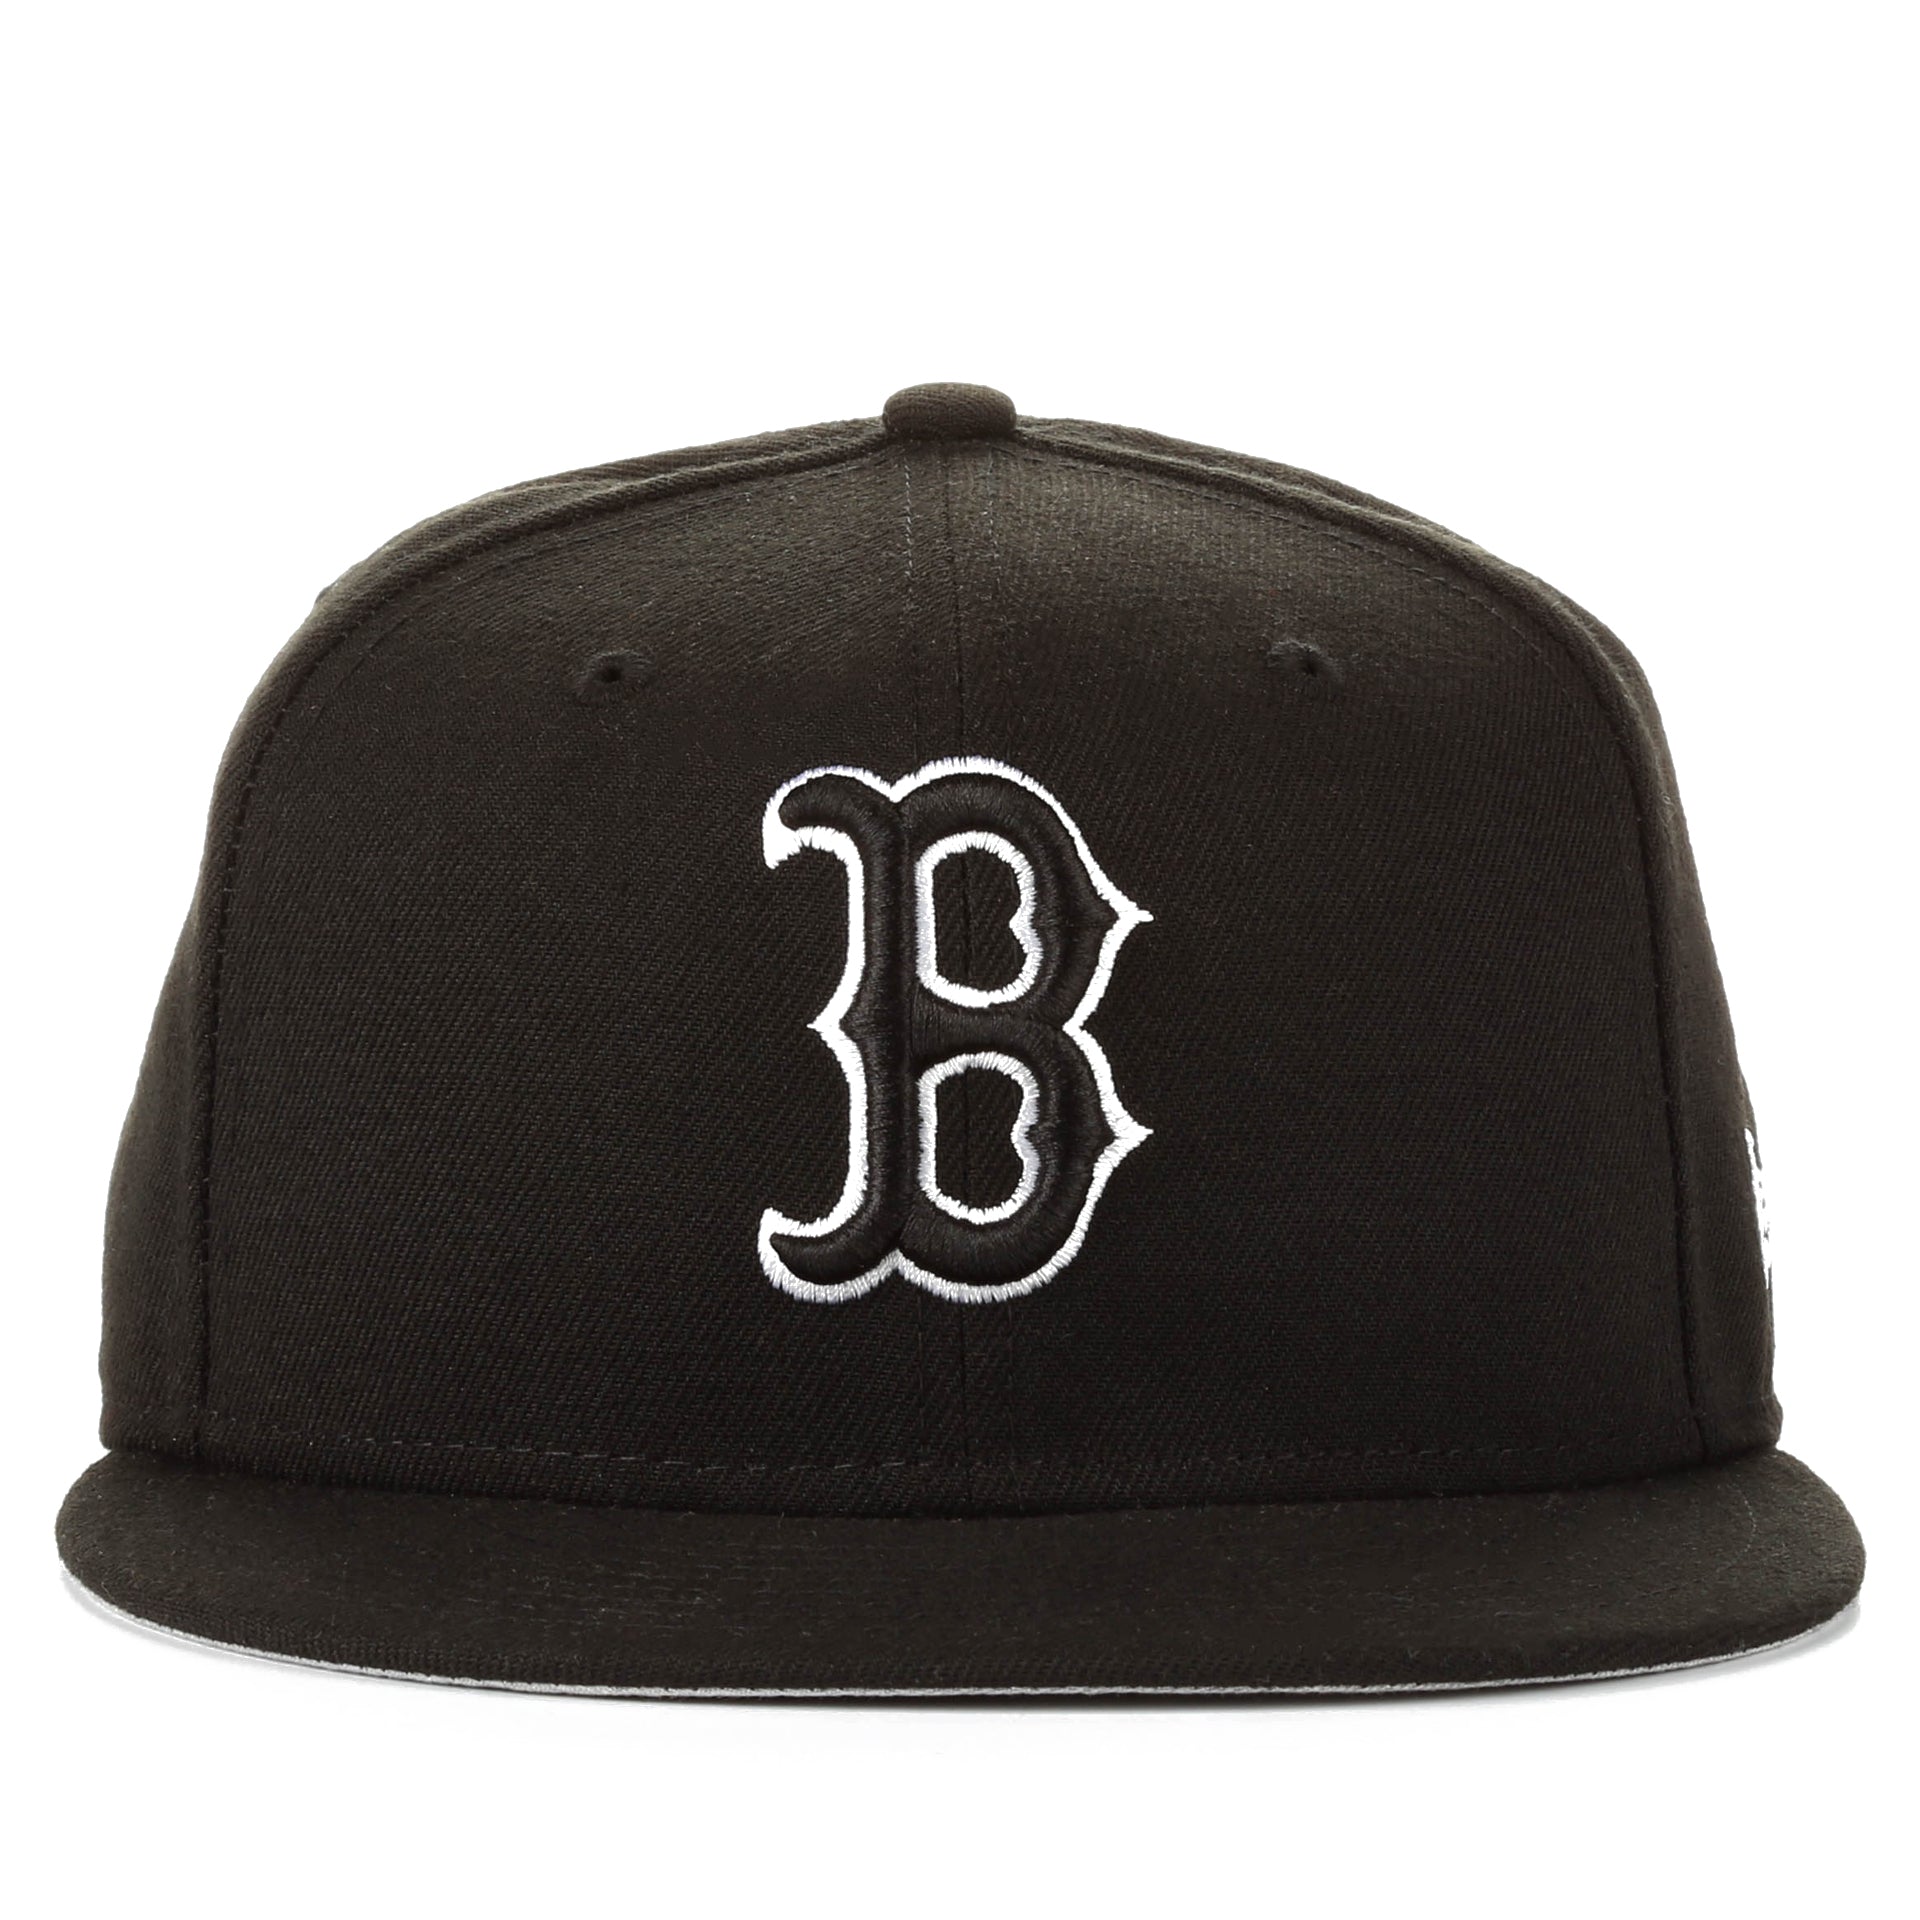 New Era 59FIFTY Boston Red Sox Fitted Black, White Hat